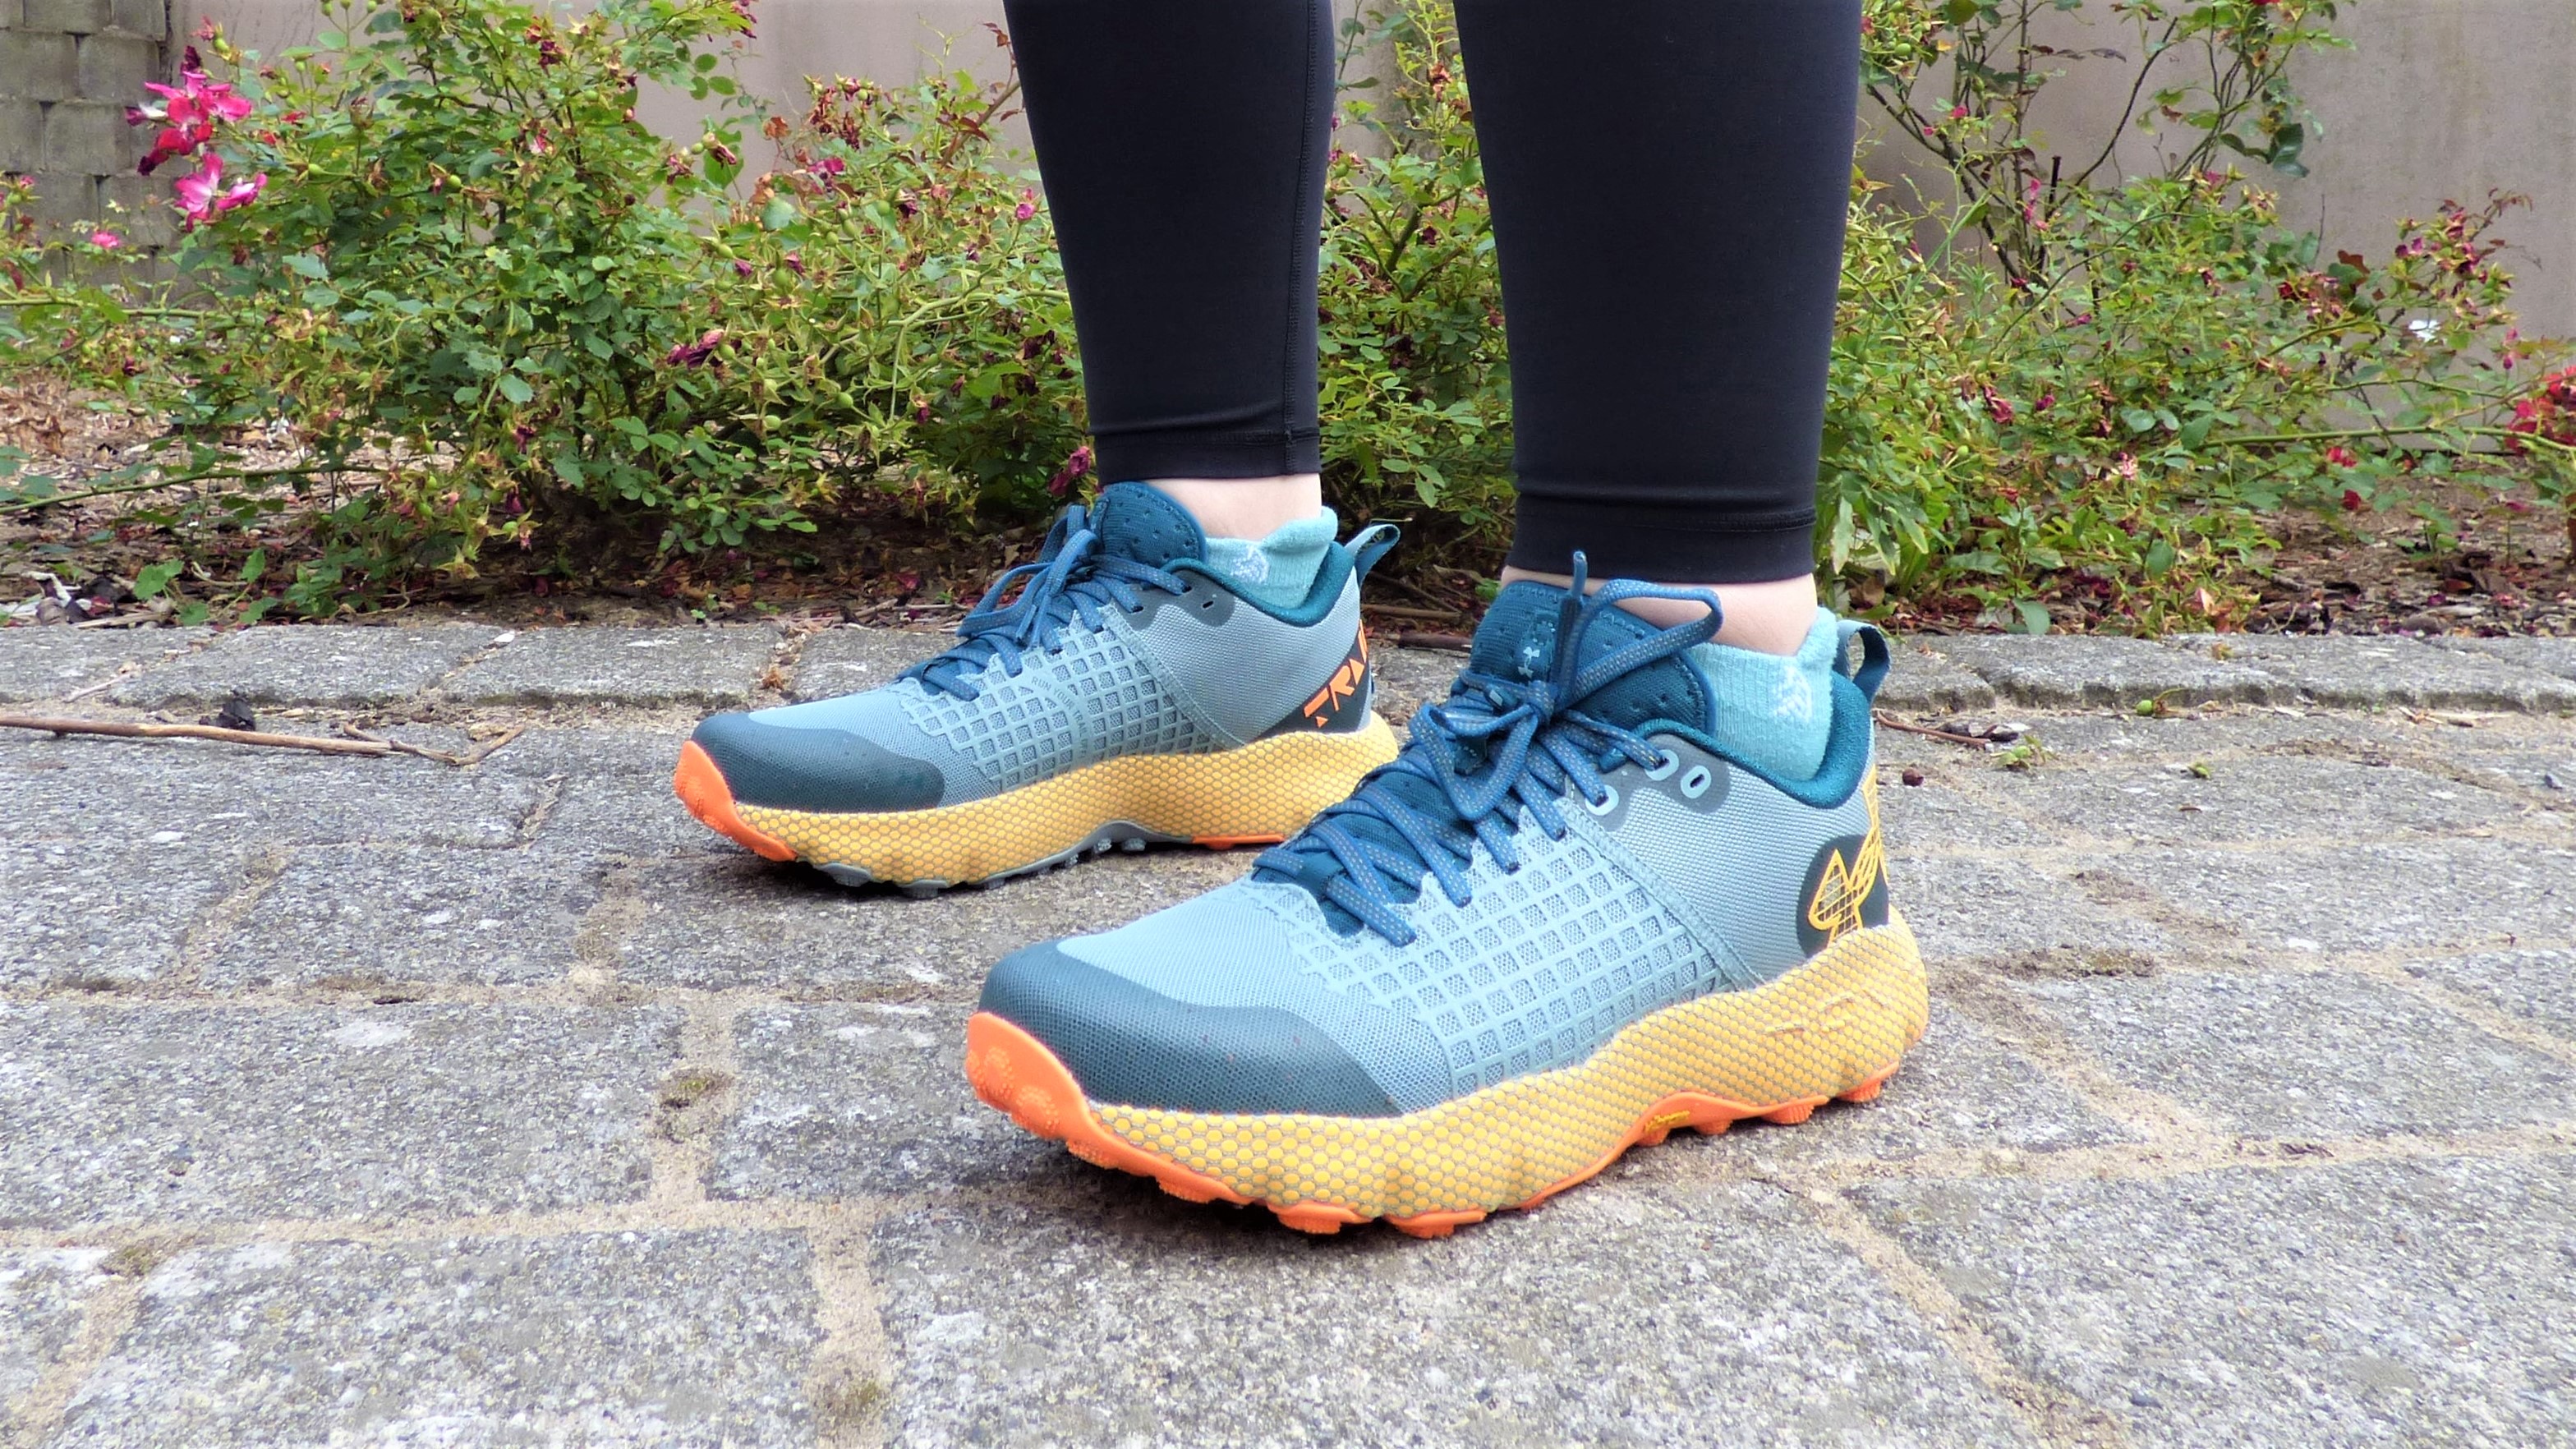 Under Armour HOVR DS Ridge TR review: security on tough trails